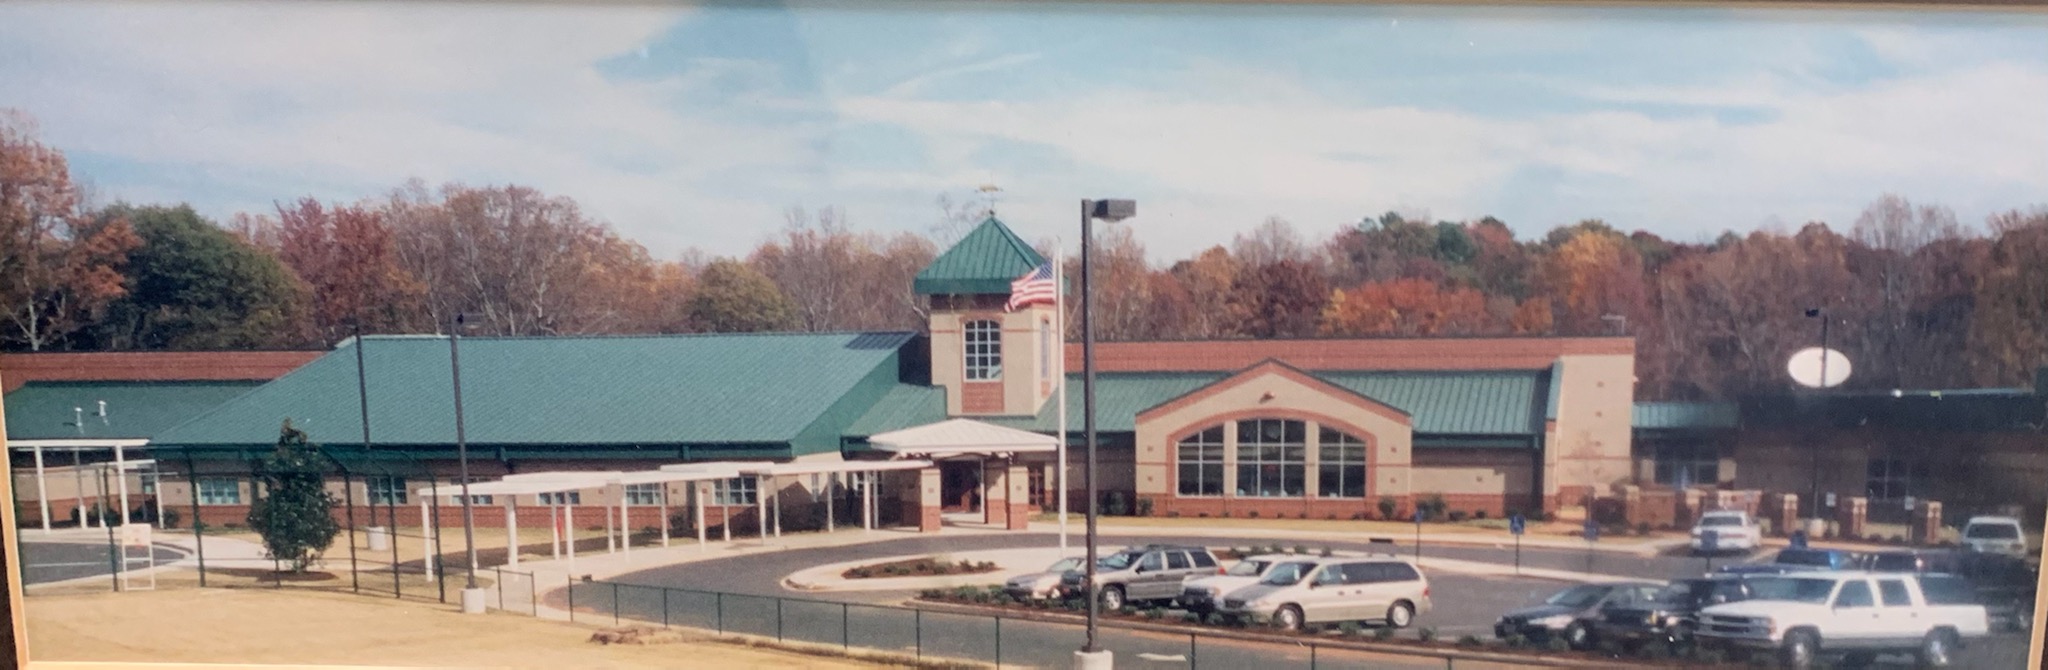 Summit Drive Elementary- New Building in 2001